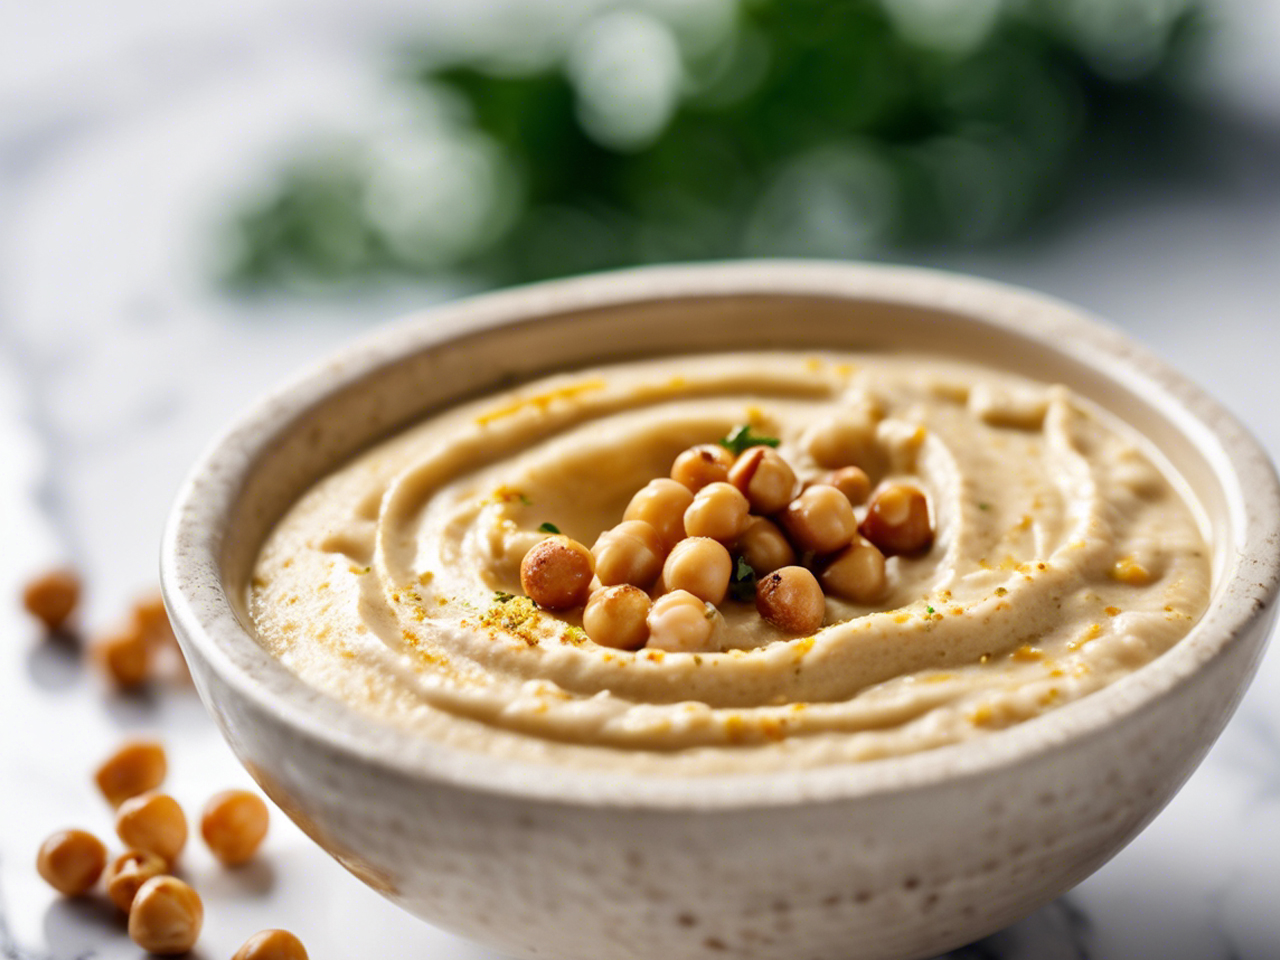 Lebanese Hummus: The Restaurant-Quality Recipe You Can Make at Home!